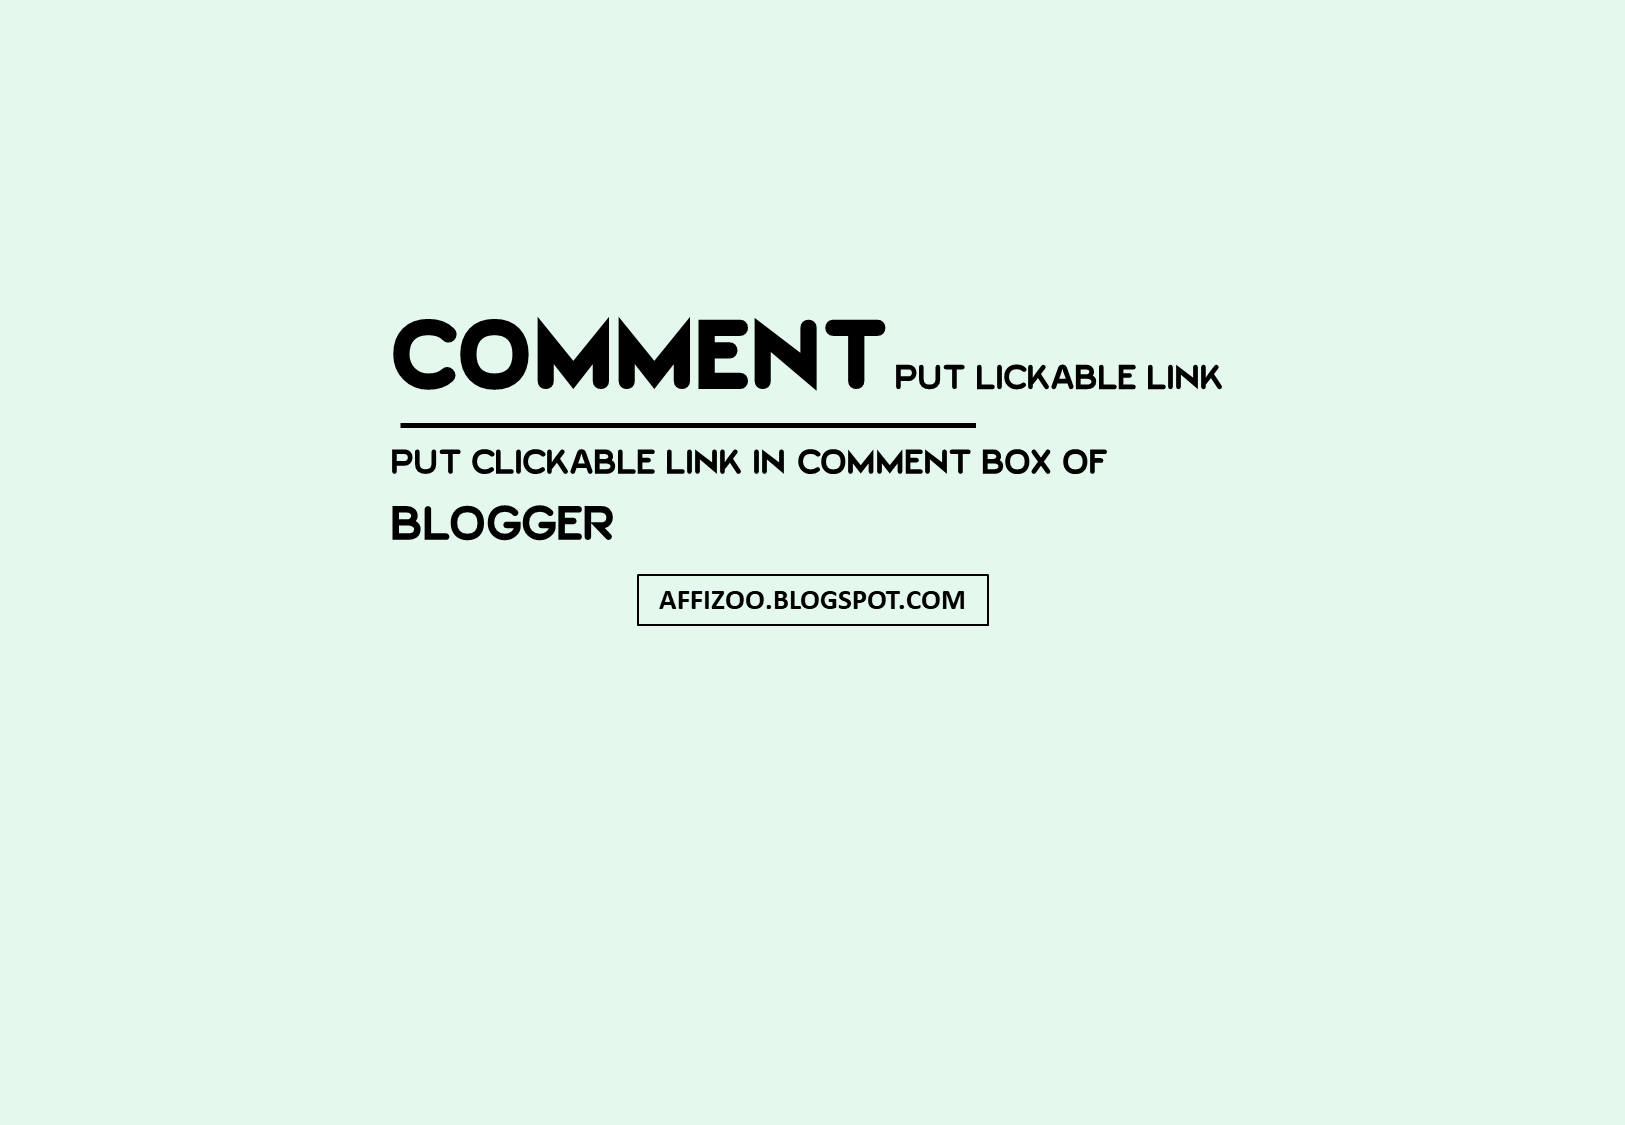 How To Put Clickable Link In Comment Box For Blogger